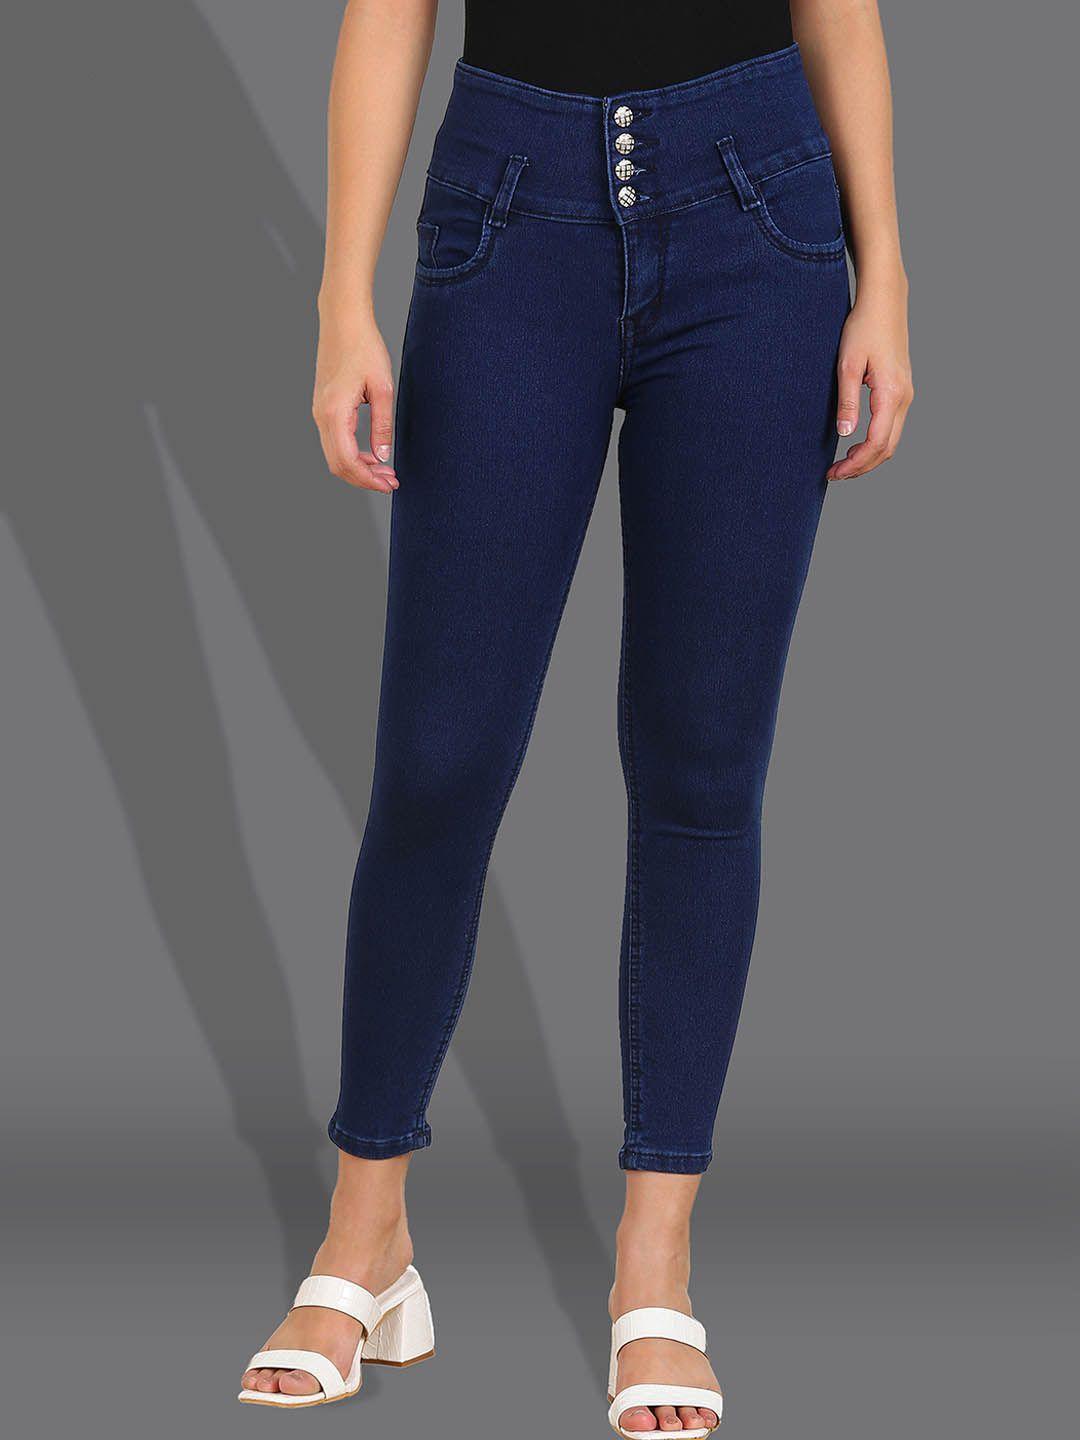 f2m women slim fit mid-rise stretchable jeans